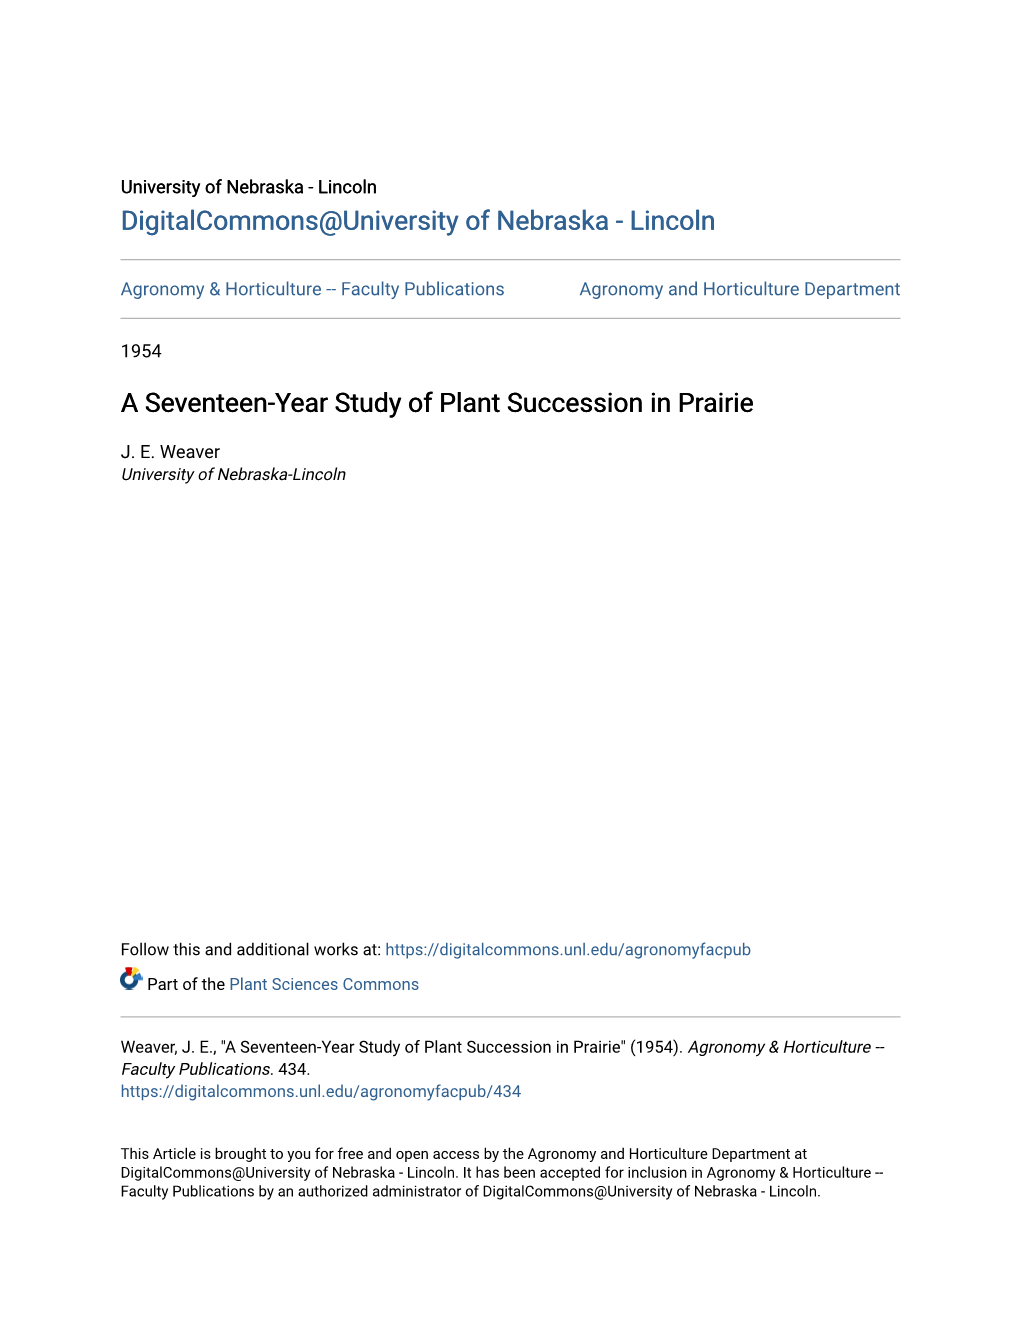 A Seventeen-Year Study of Plant Succession in Prairie